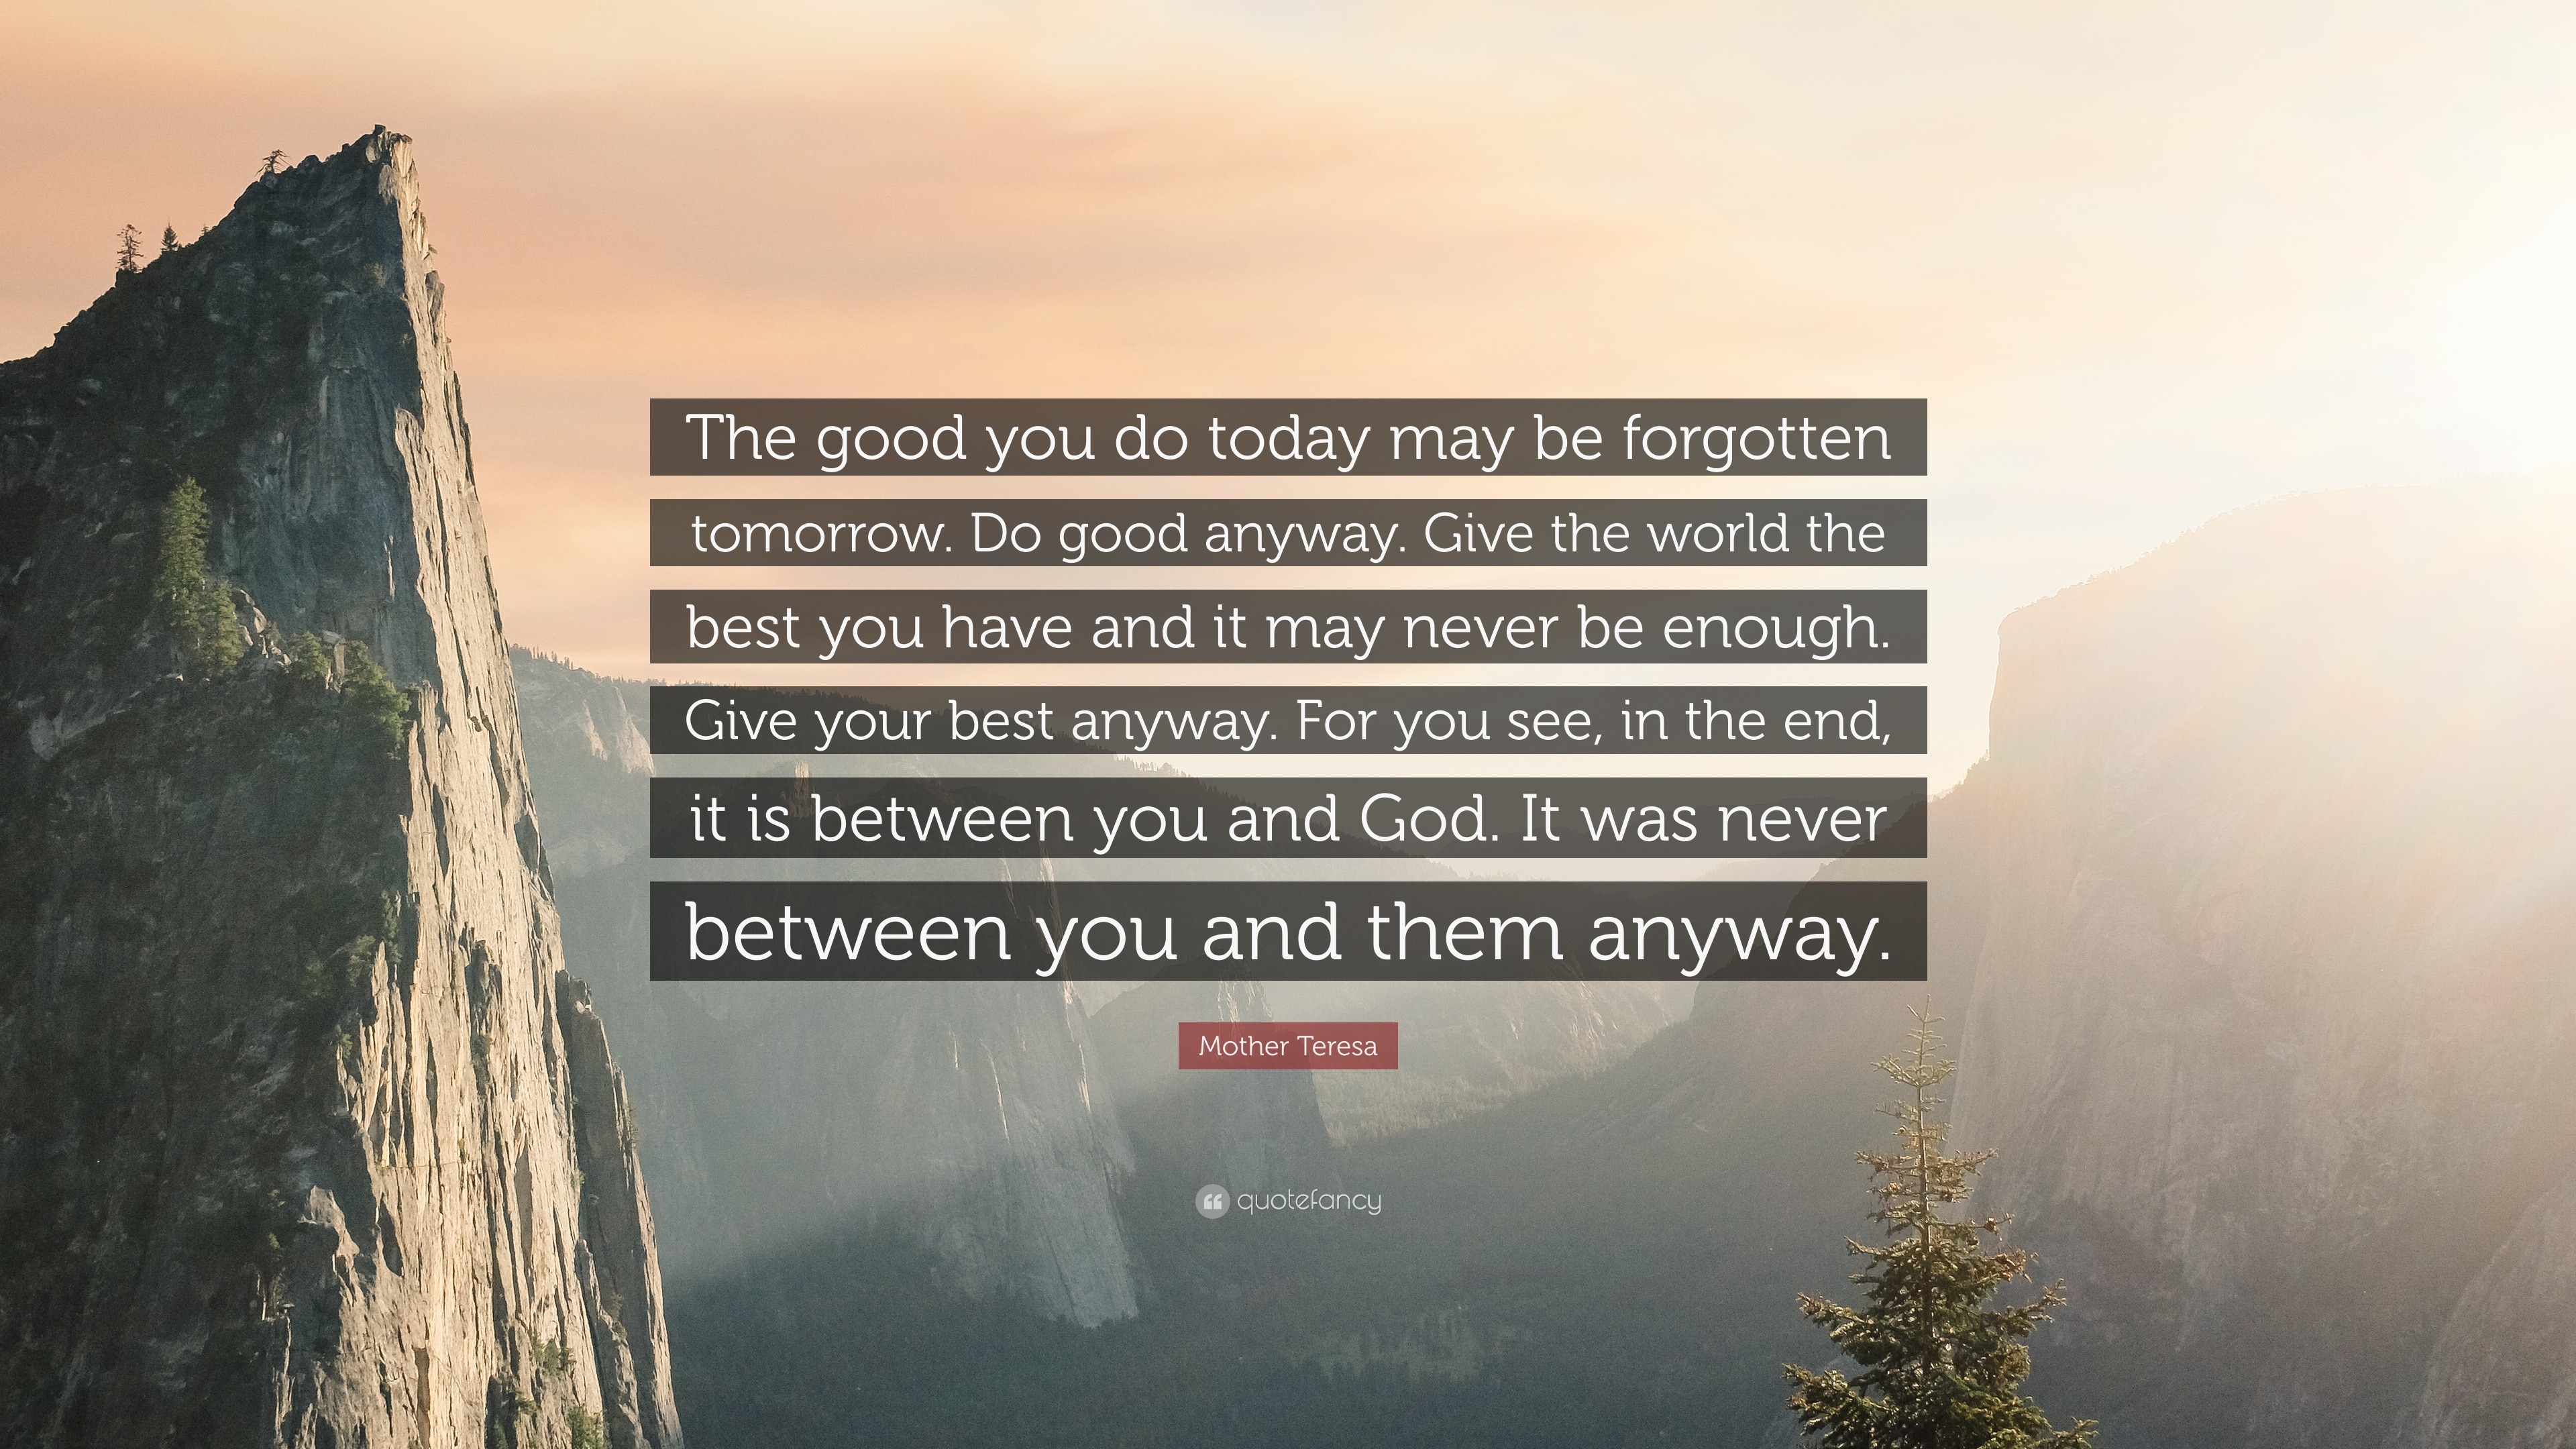 Mother Teresa Quote: “The good you do today may be forgotten tomorrow